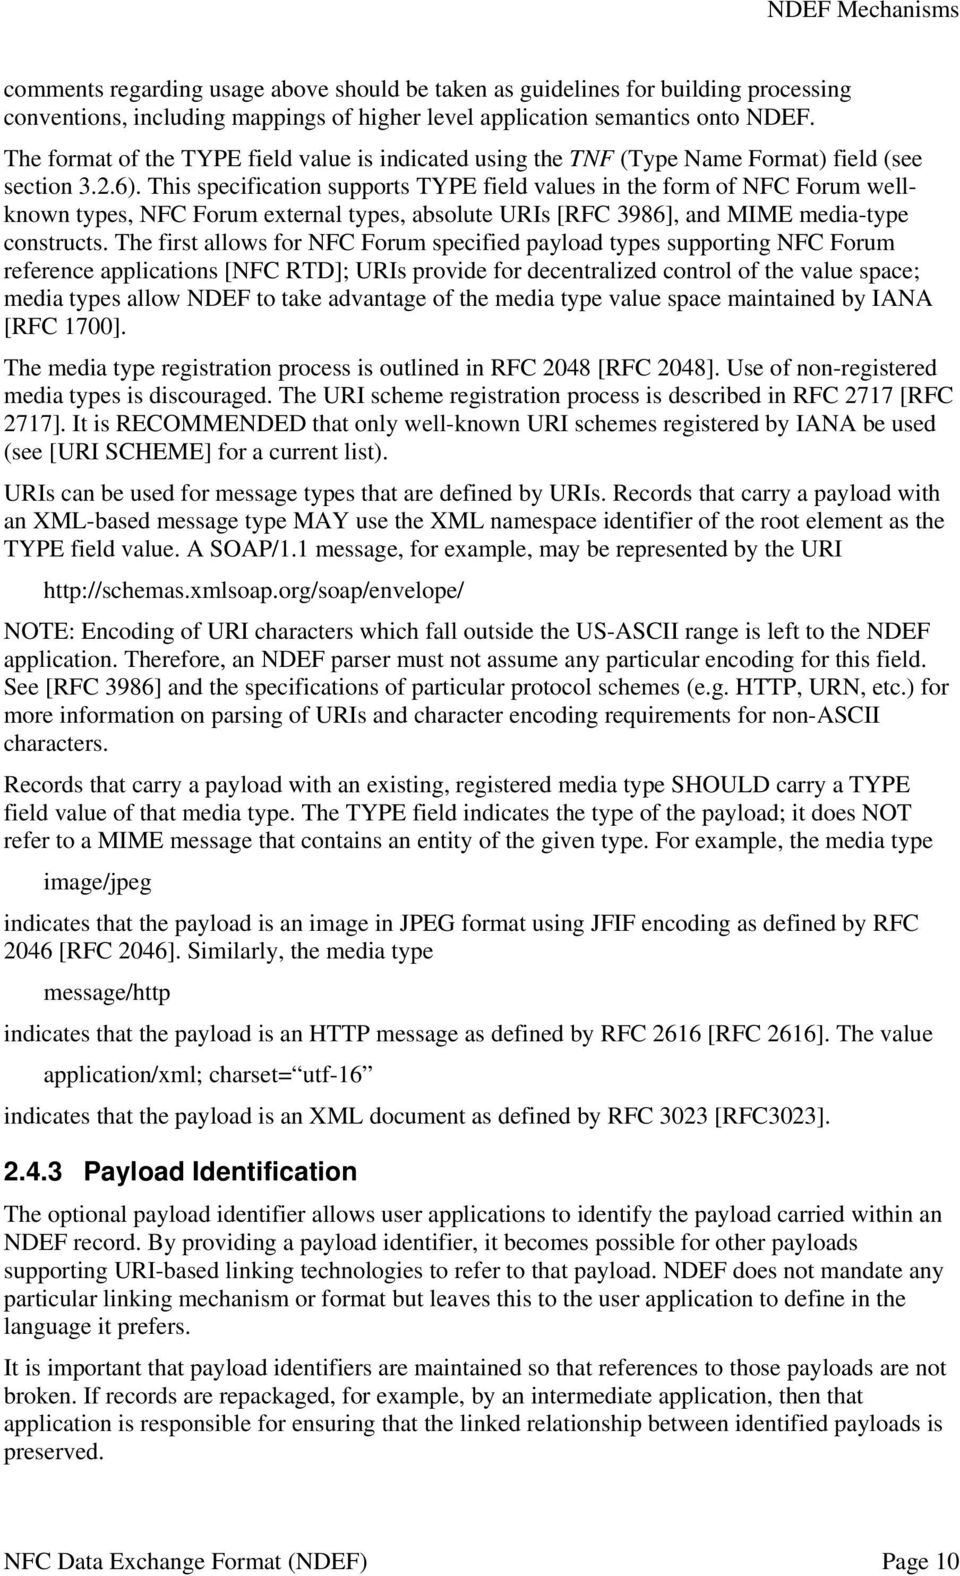 This specification supports TYPE field values in the form of NFC Forum wellknown types, NFC Forum external types, absolute URIs [RFC 3986], and MIME media-type constructs.